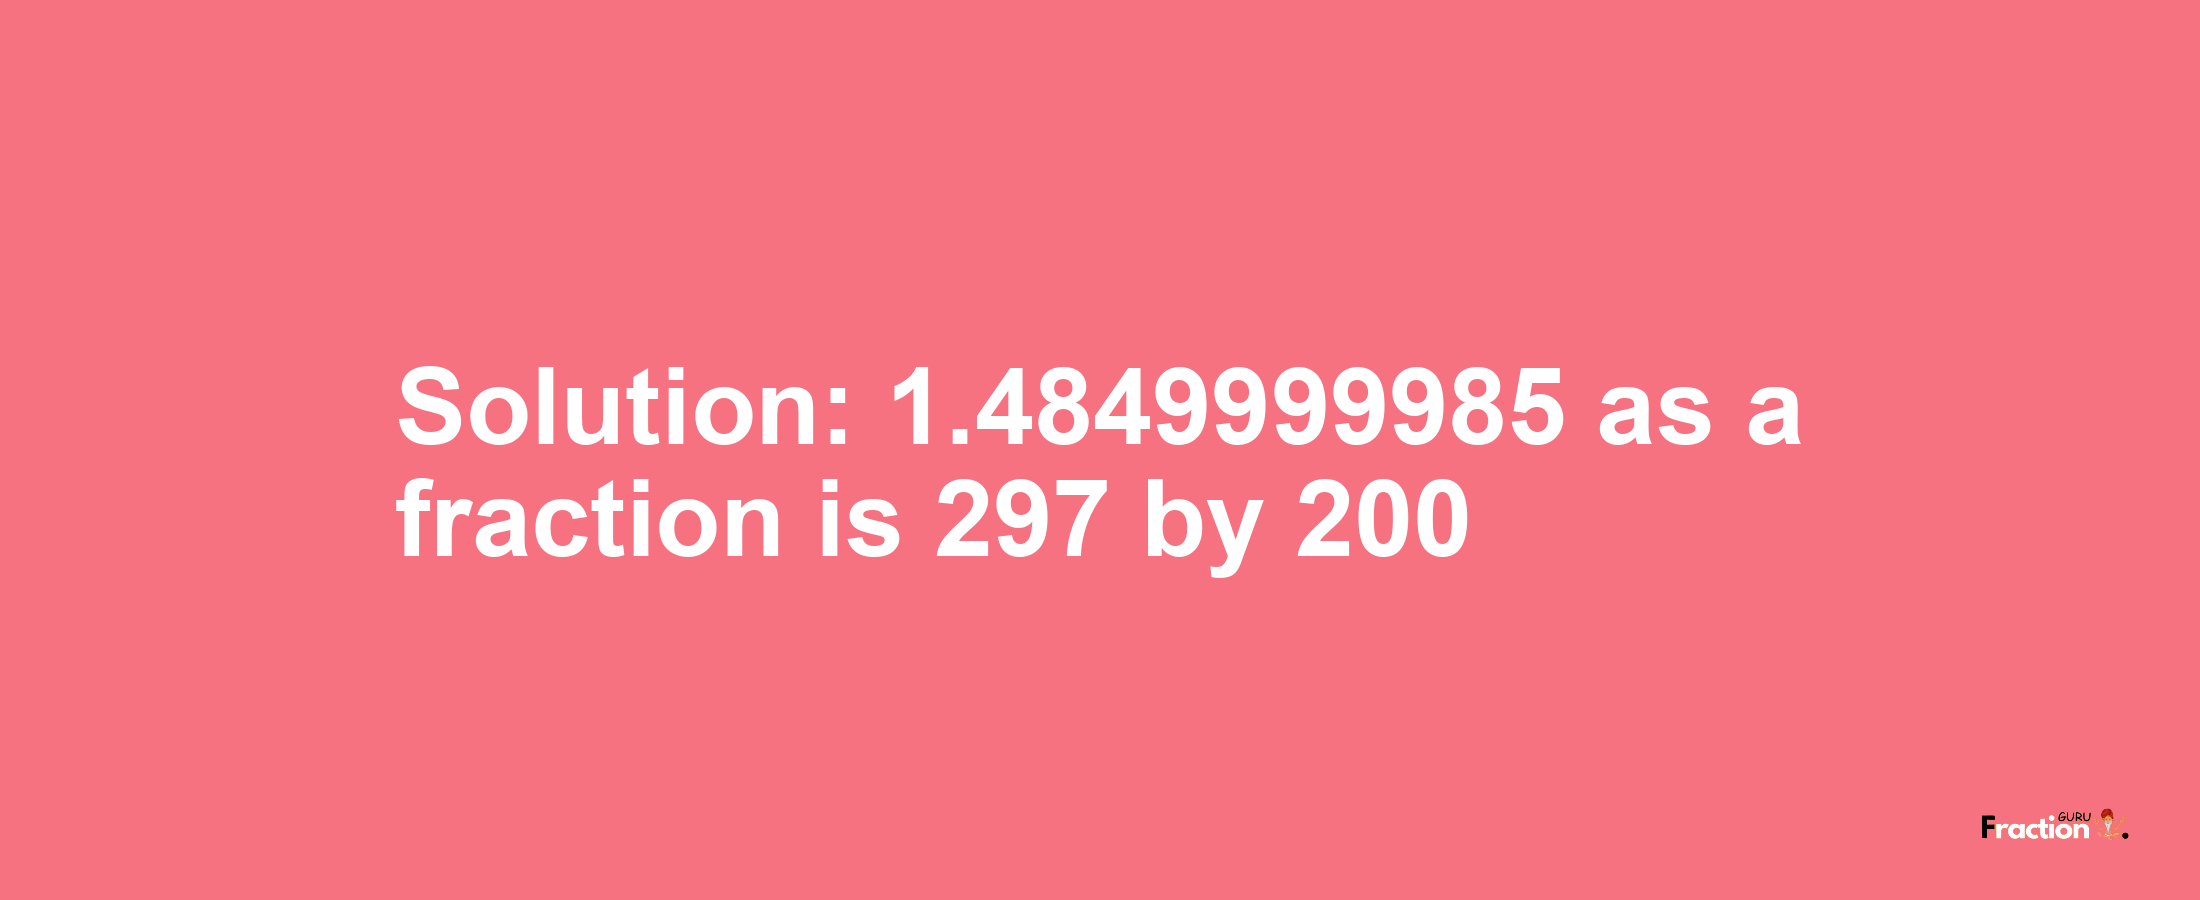 Solution:1.4849999985 as a fraction is 297/200